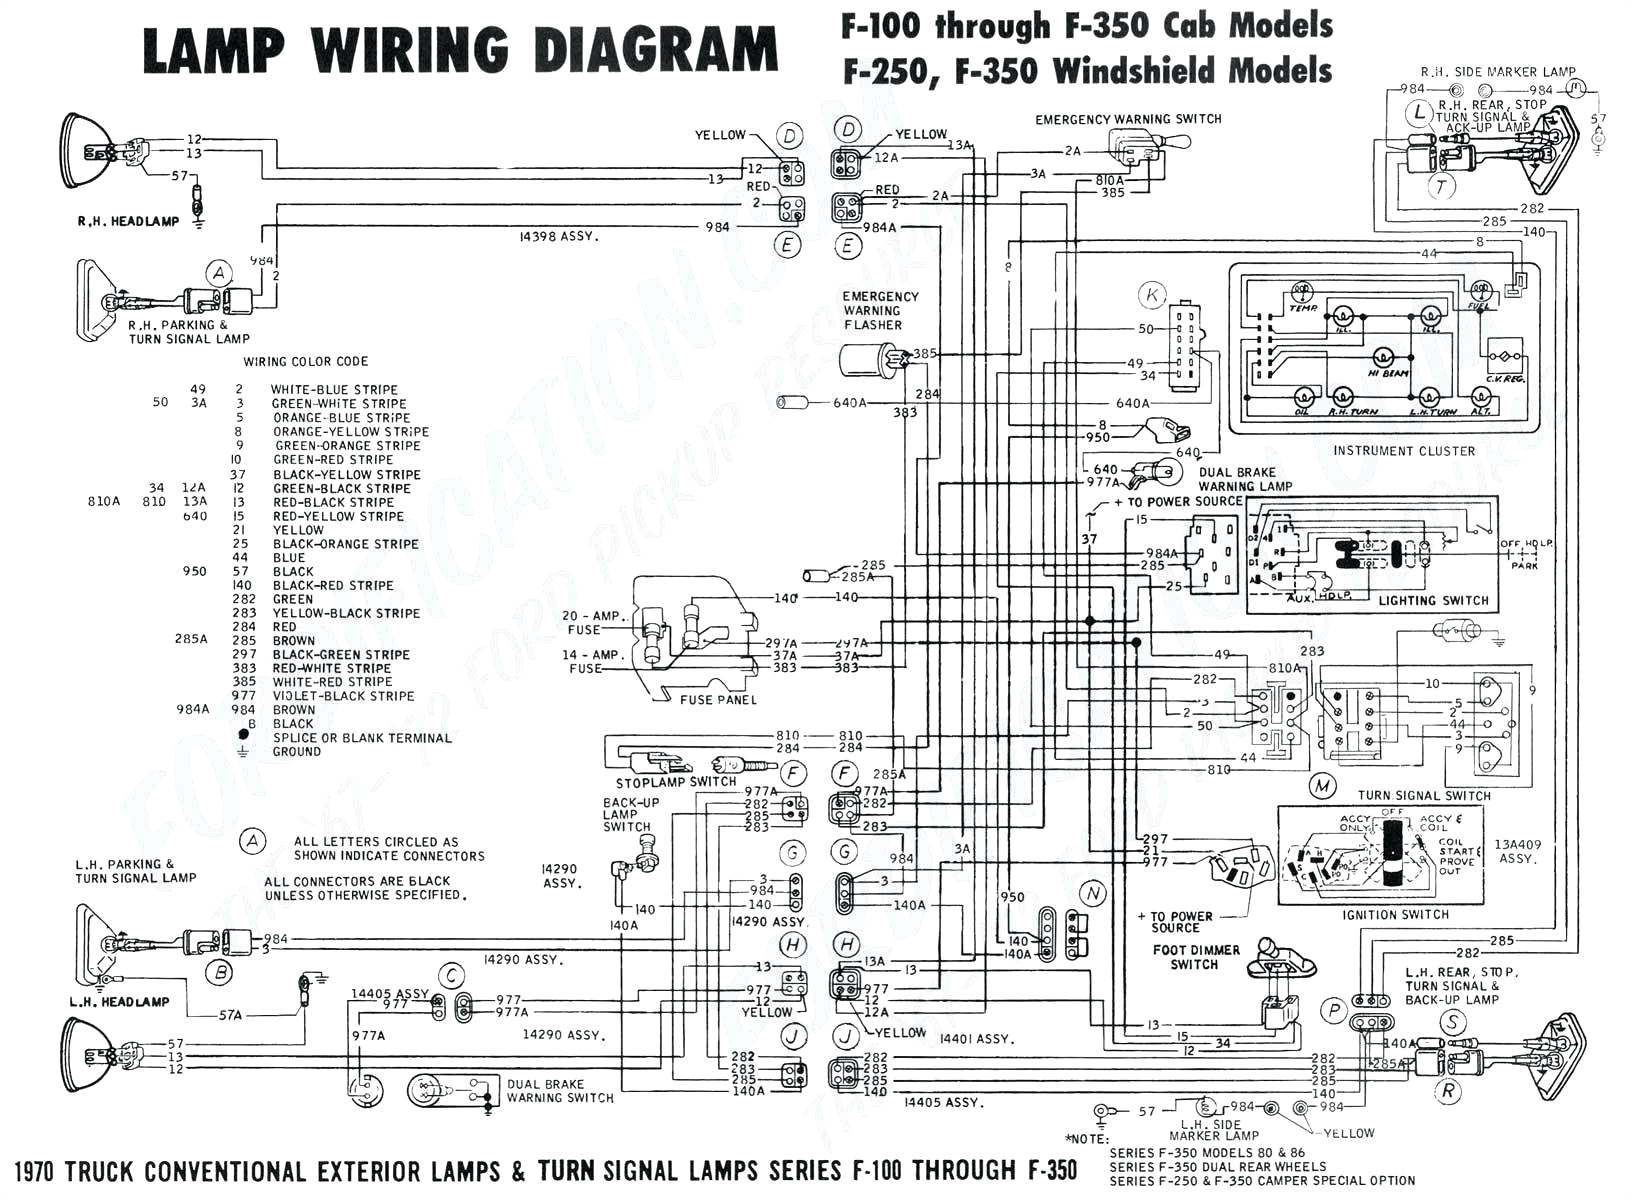 1997 ford f 250 trailer wiring harness diagram wiring diagram sort 1997 ford f150 trailer wiring